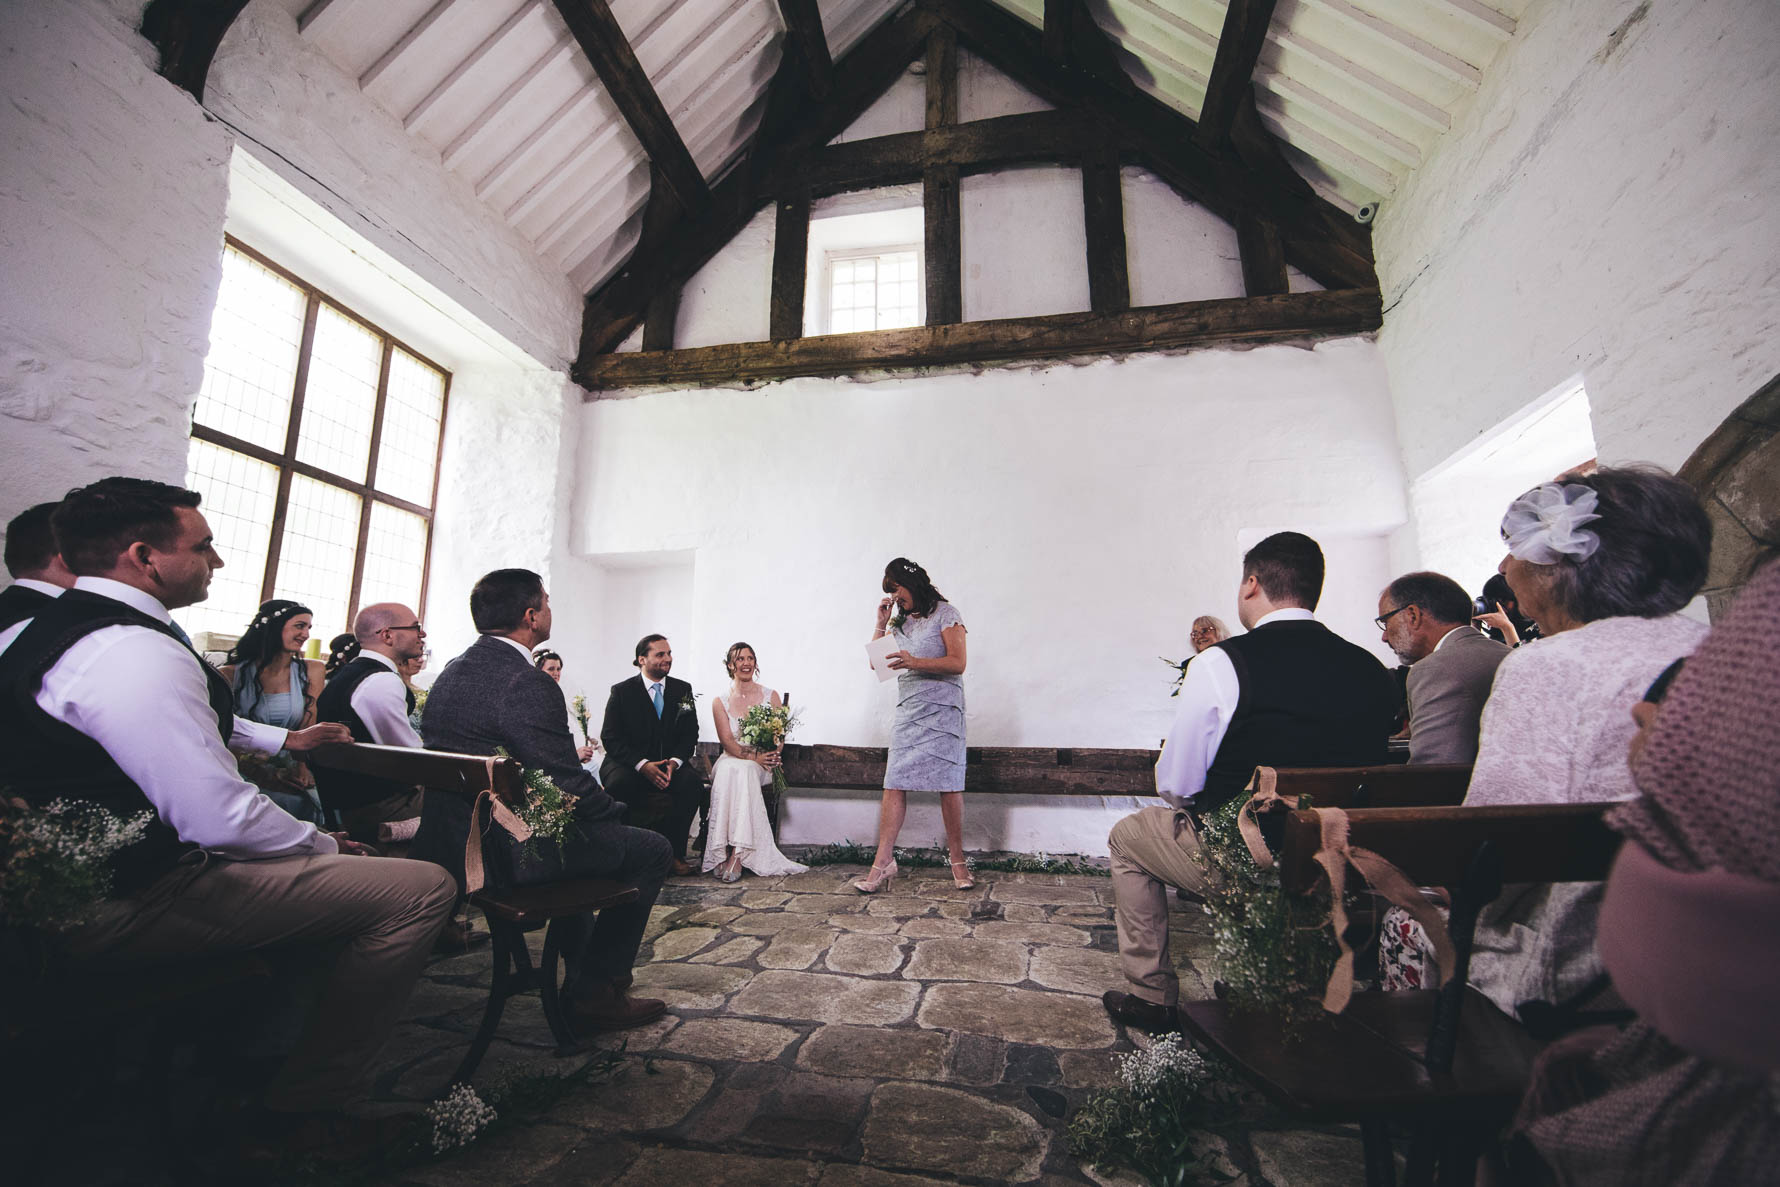 Mother of the bride stood reading a speech during the wedding ceremony in an old white washed building with wooden beams and a pitched roof whilst the rest of the wedding party are seated